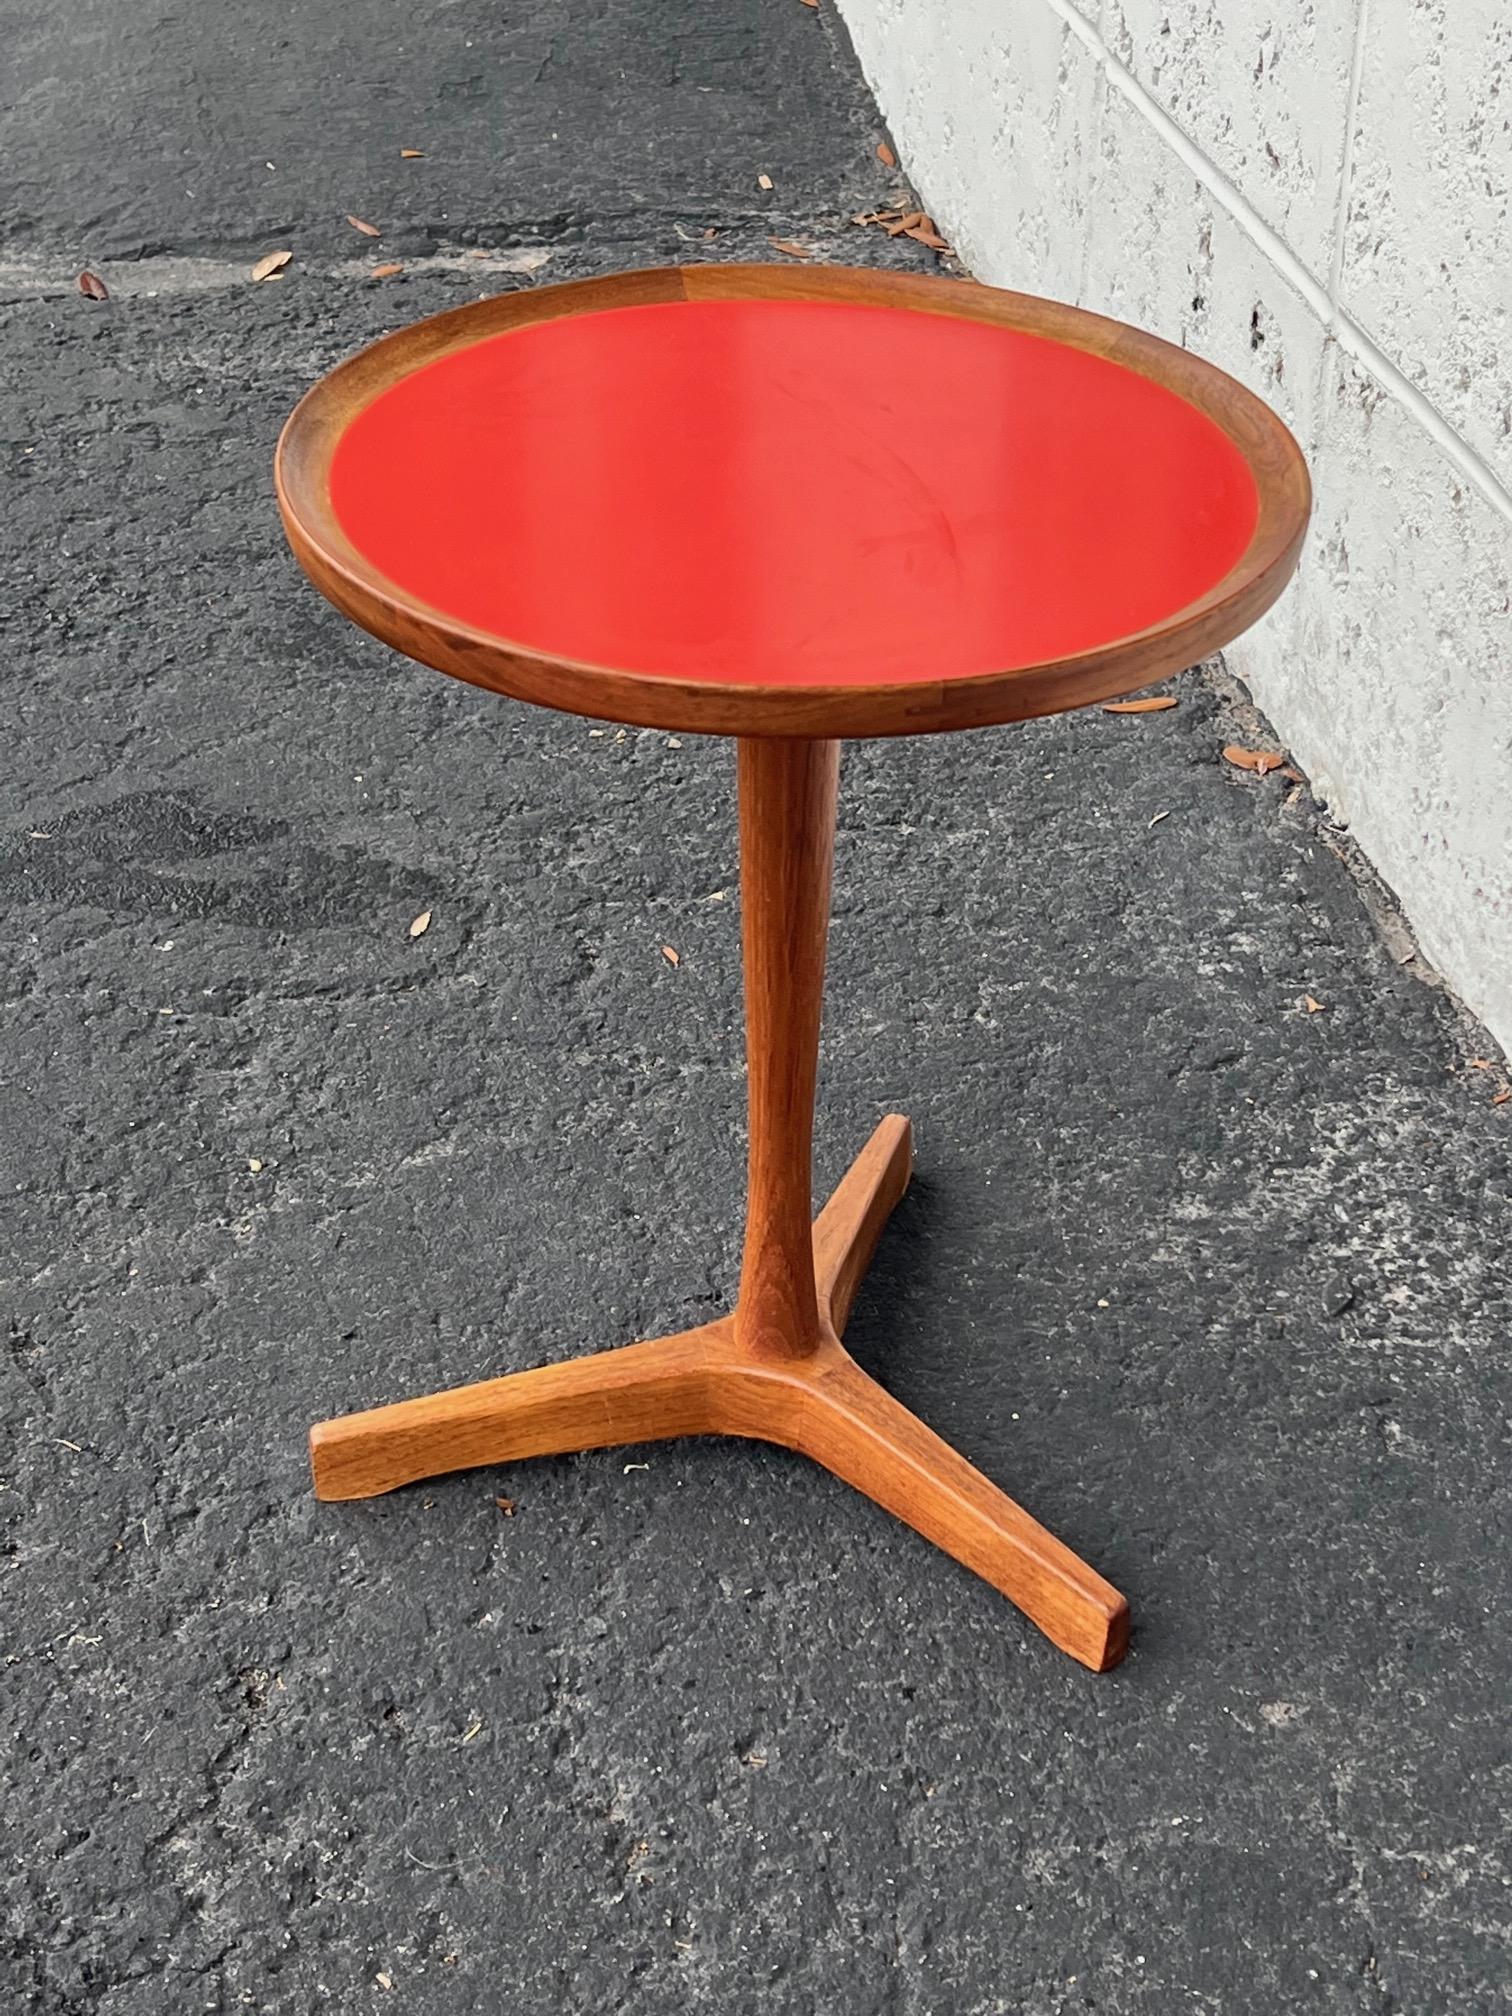 A classic Danish side table with three legs by Hans Andersen. Round top in original mica, teak wood. Nice patina and very good condition. Signed underneath.